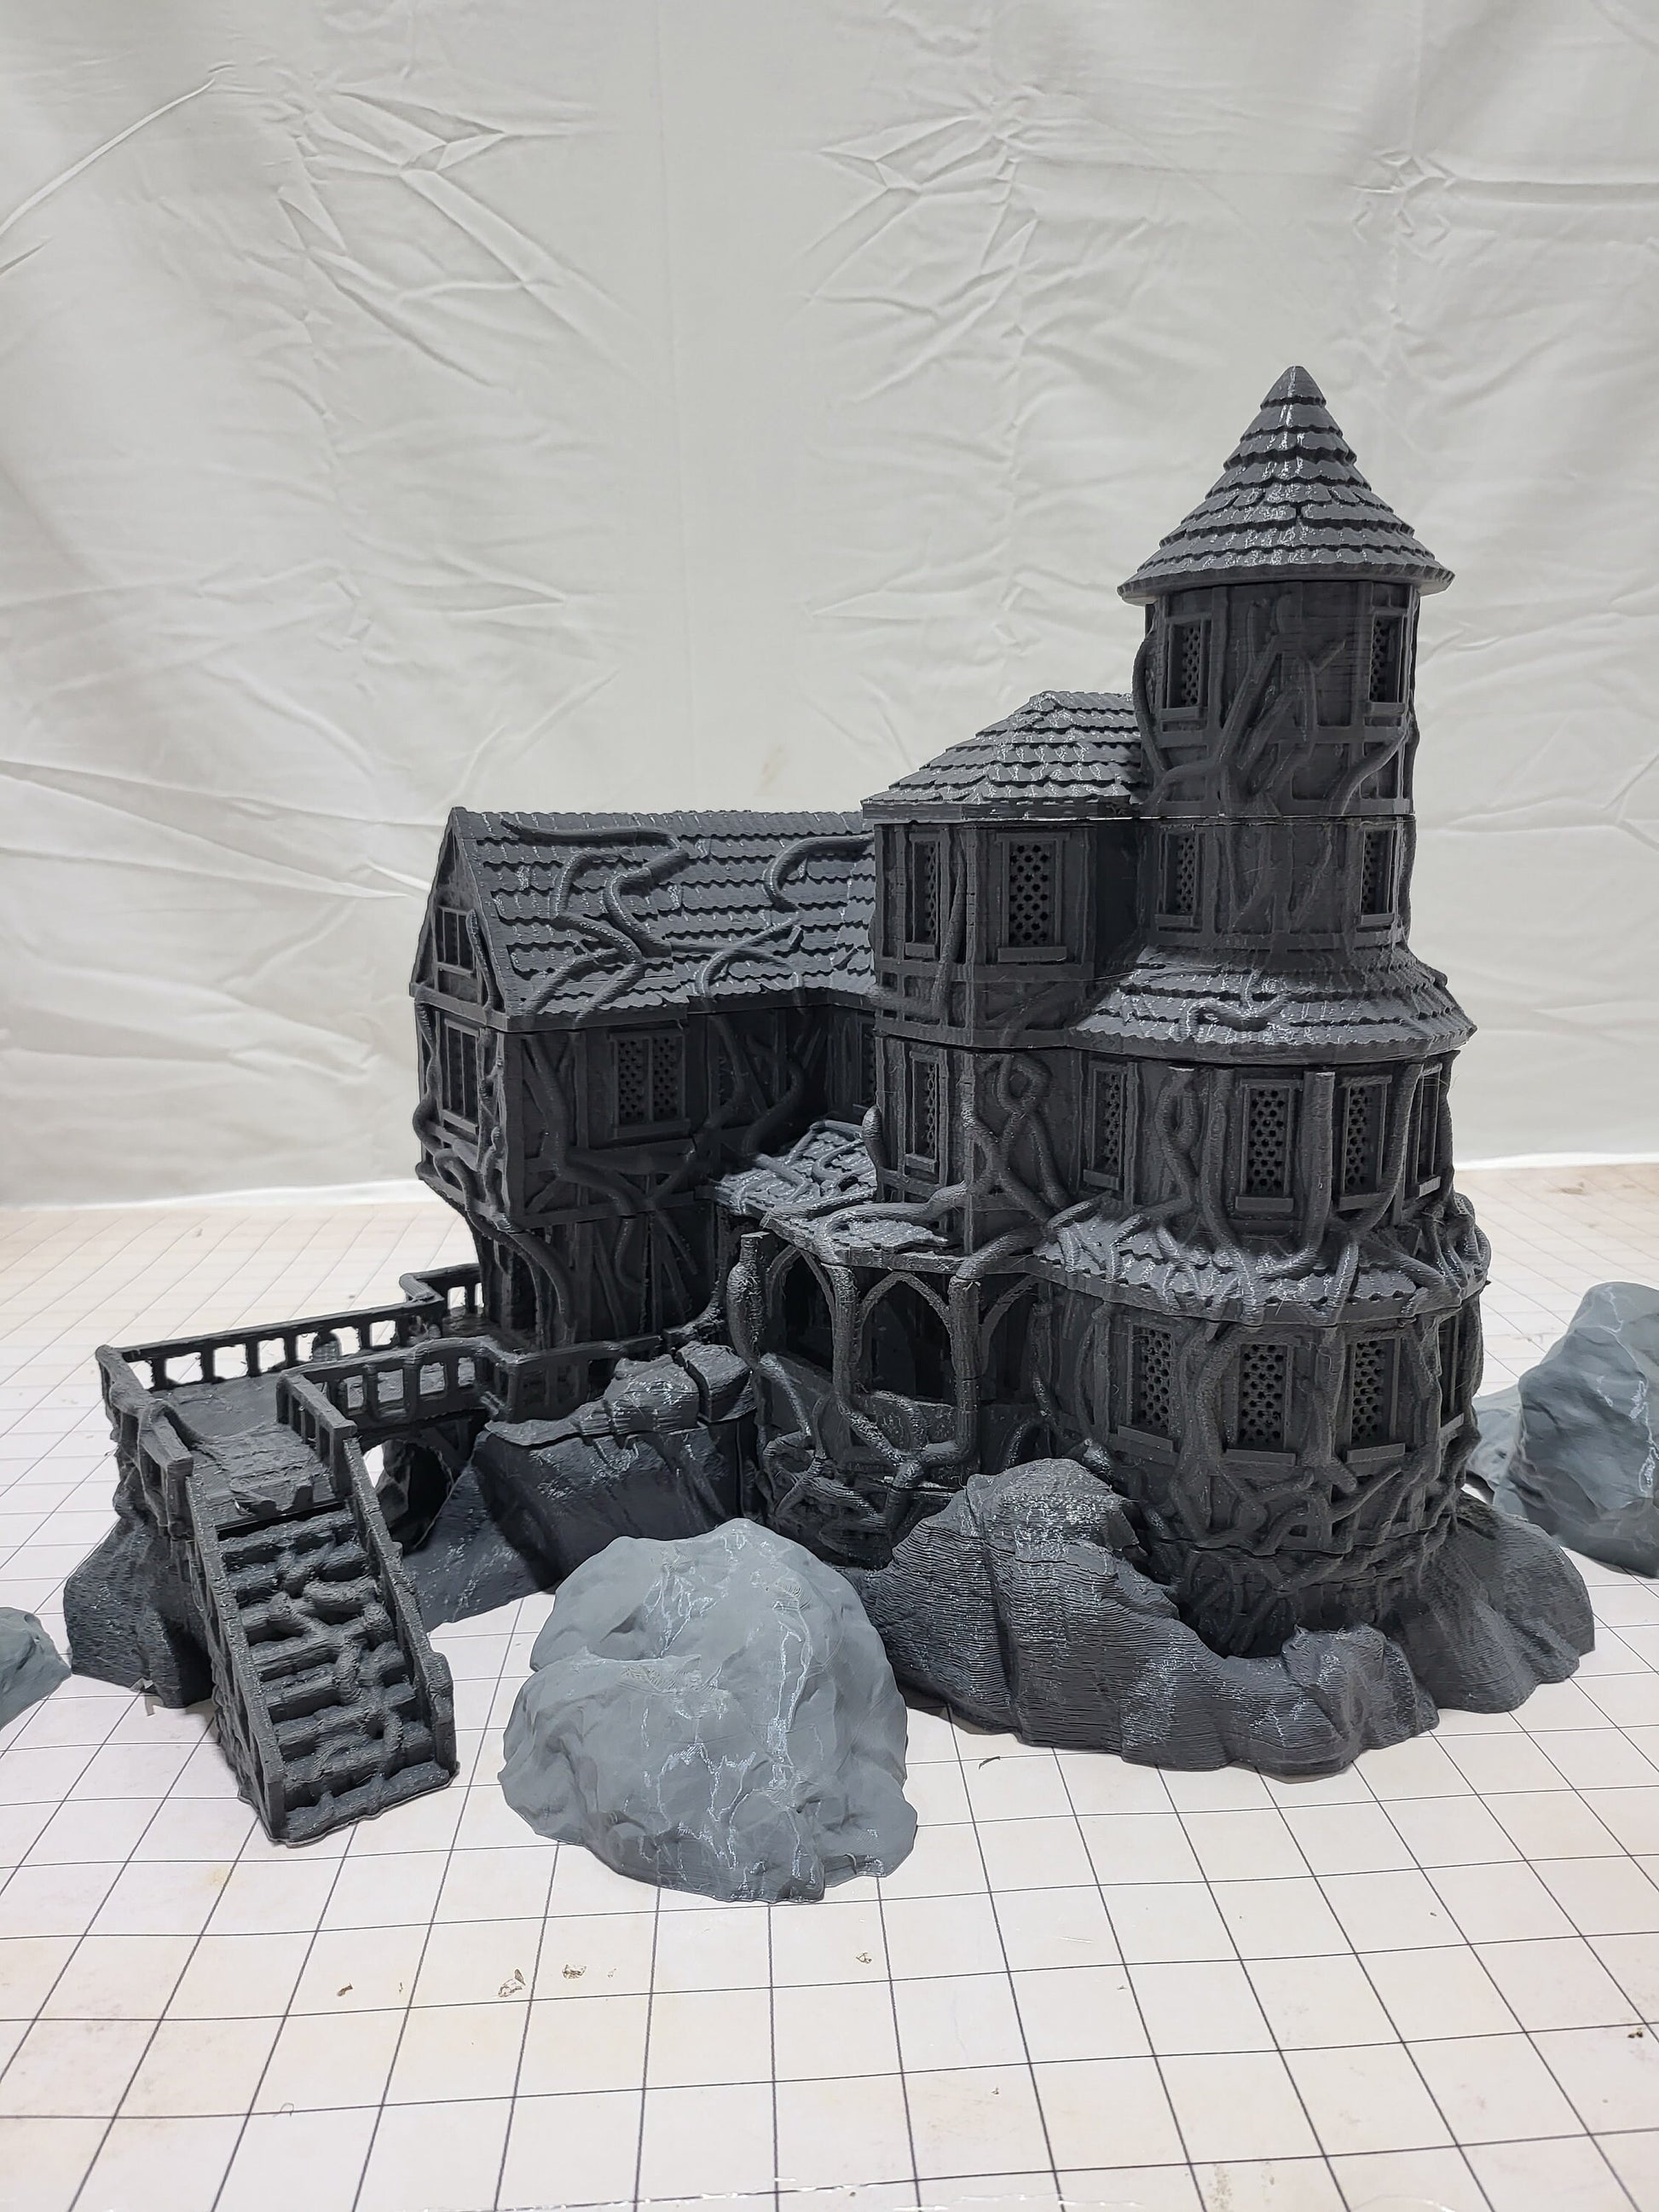 Cultist Manor, Forgotten Manor, Secluded Manor, Dungeons and Dragons, Lunatic Hideout, Chaotic terrain